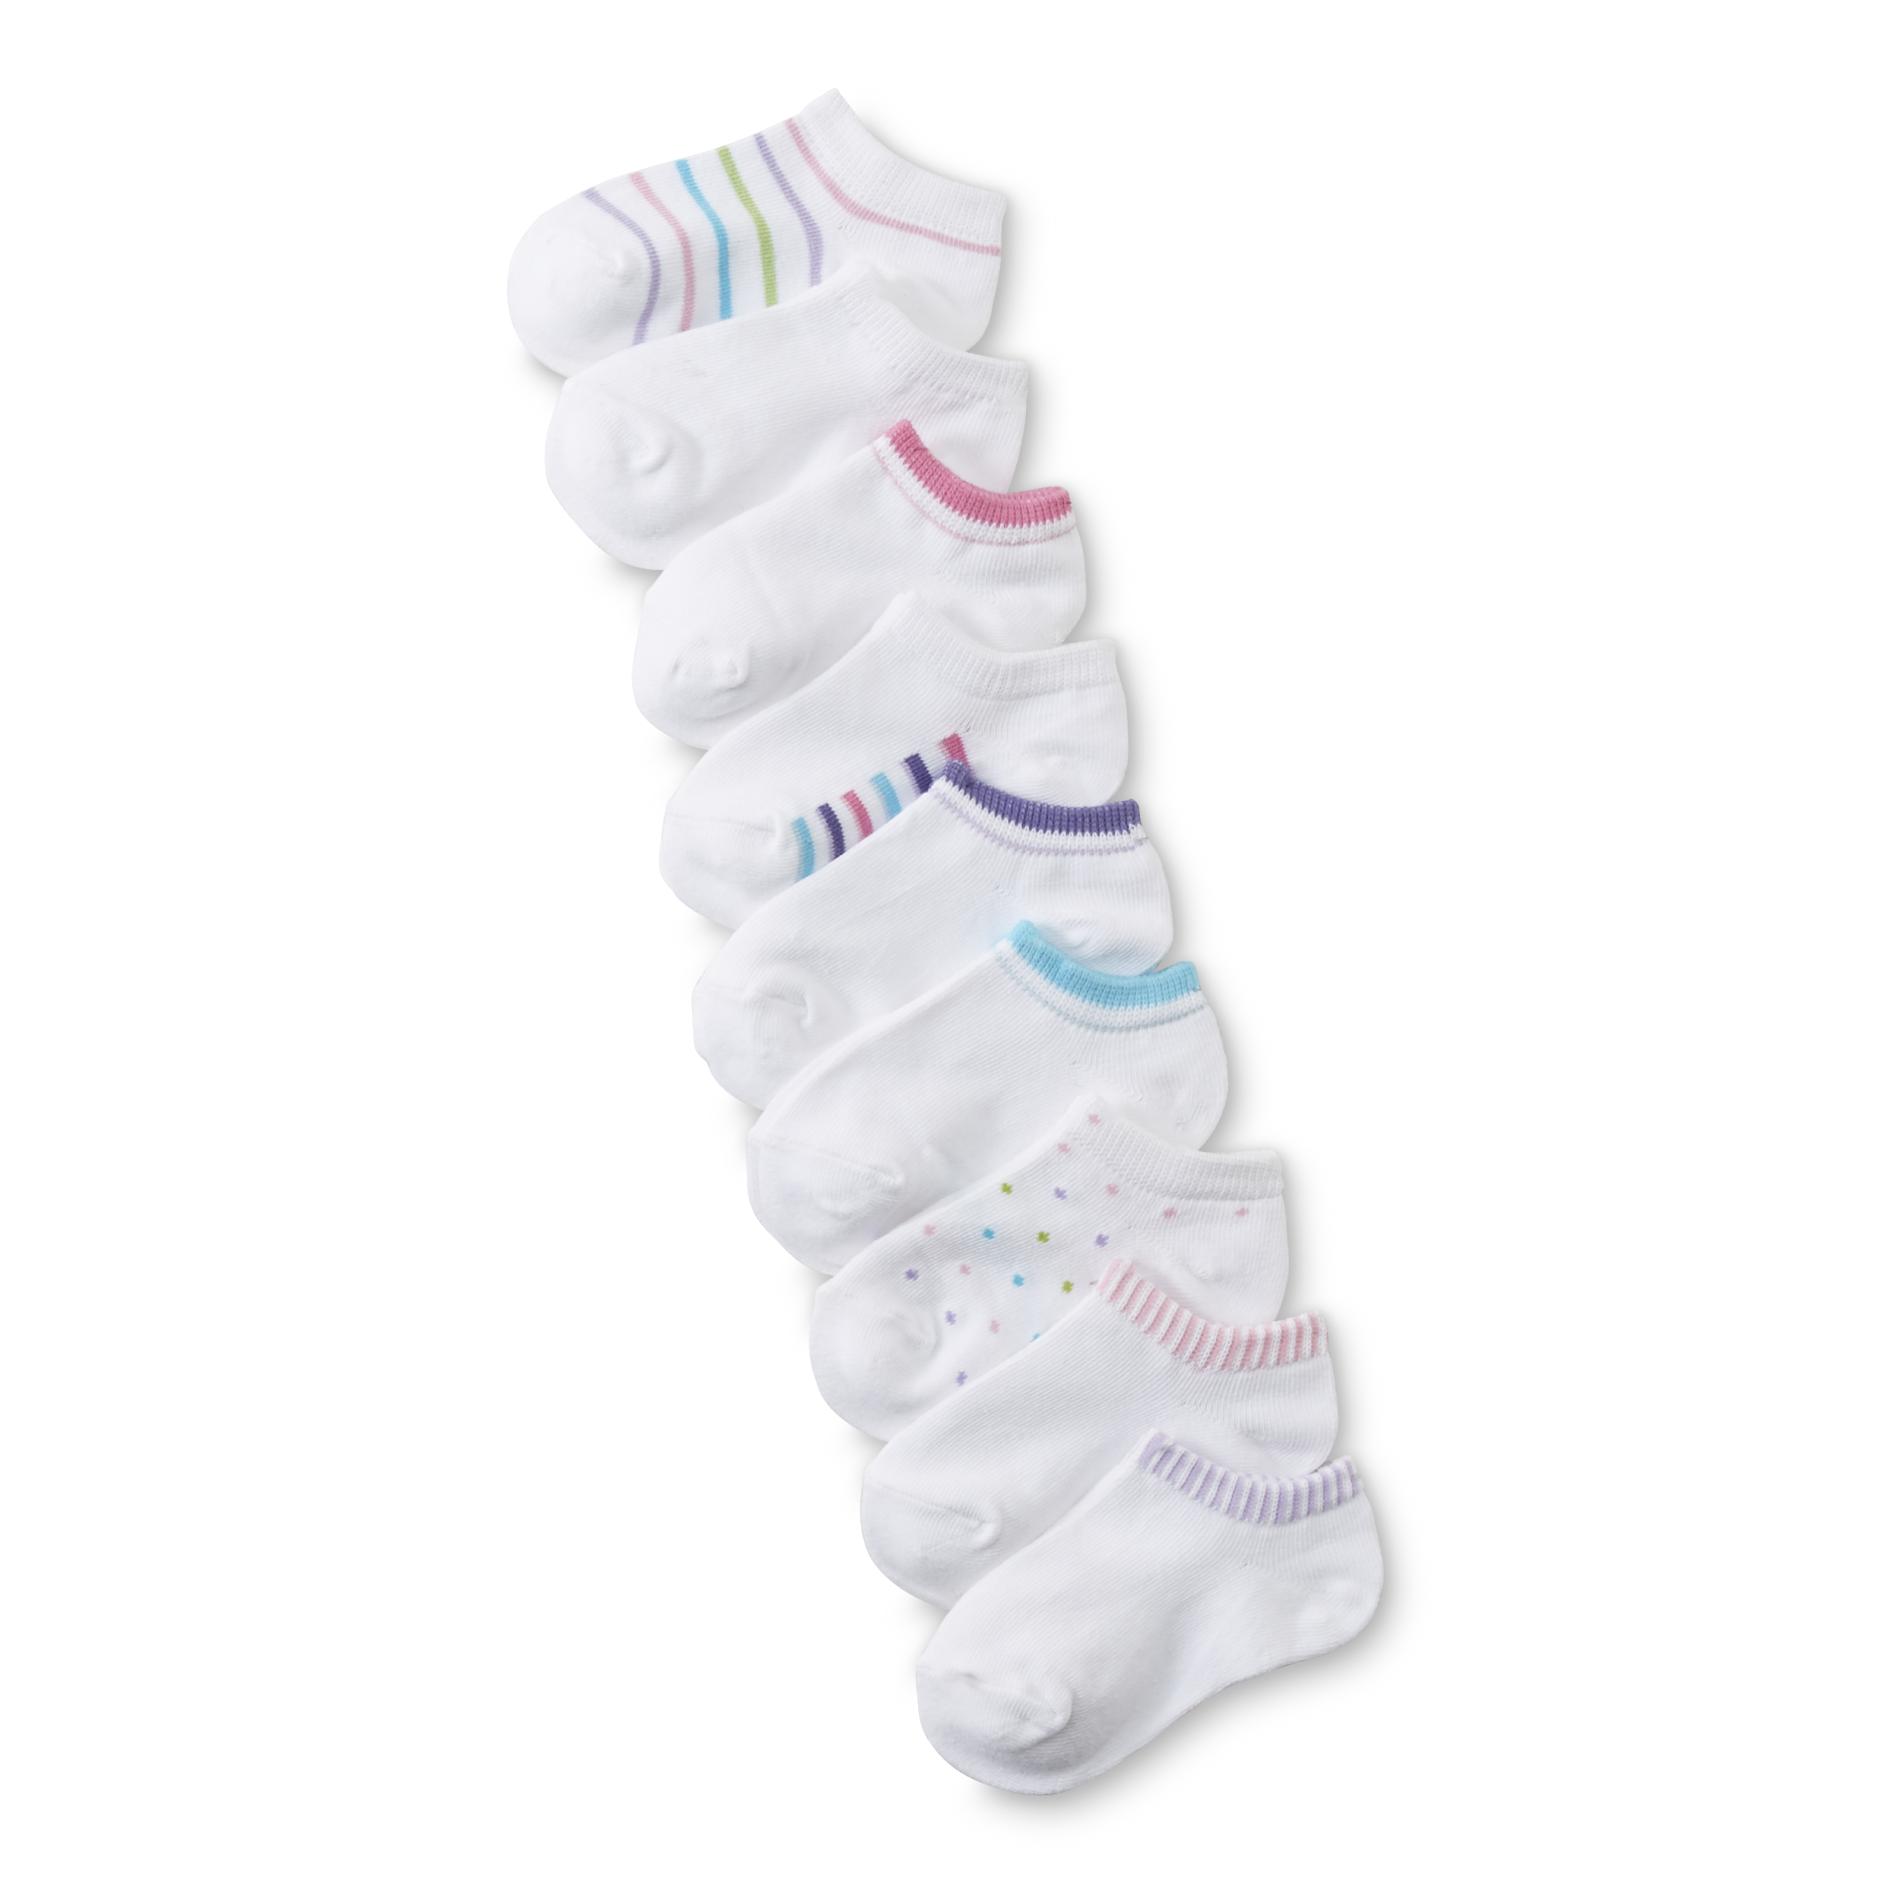 Basic Editions Girl's 10-Pack No-Show Socks -  Solids & Patterns